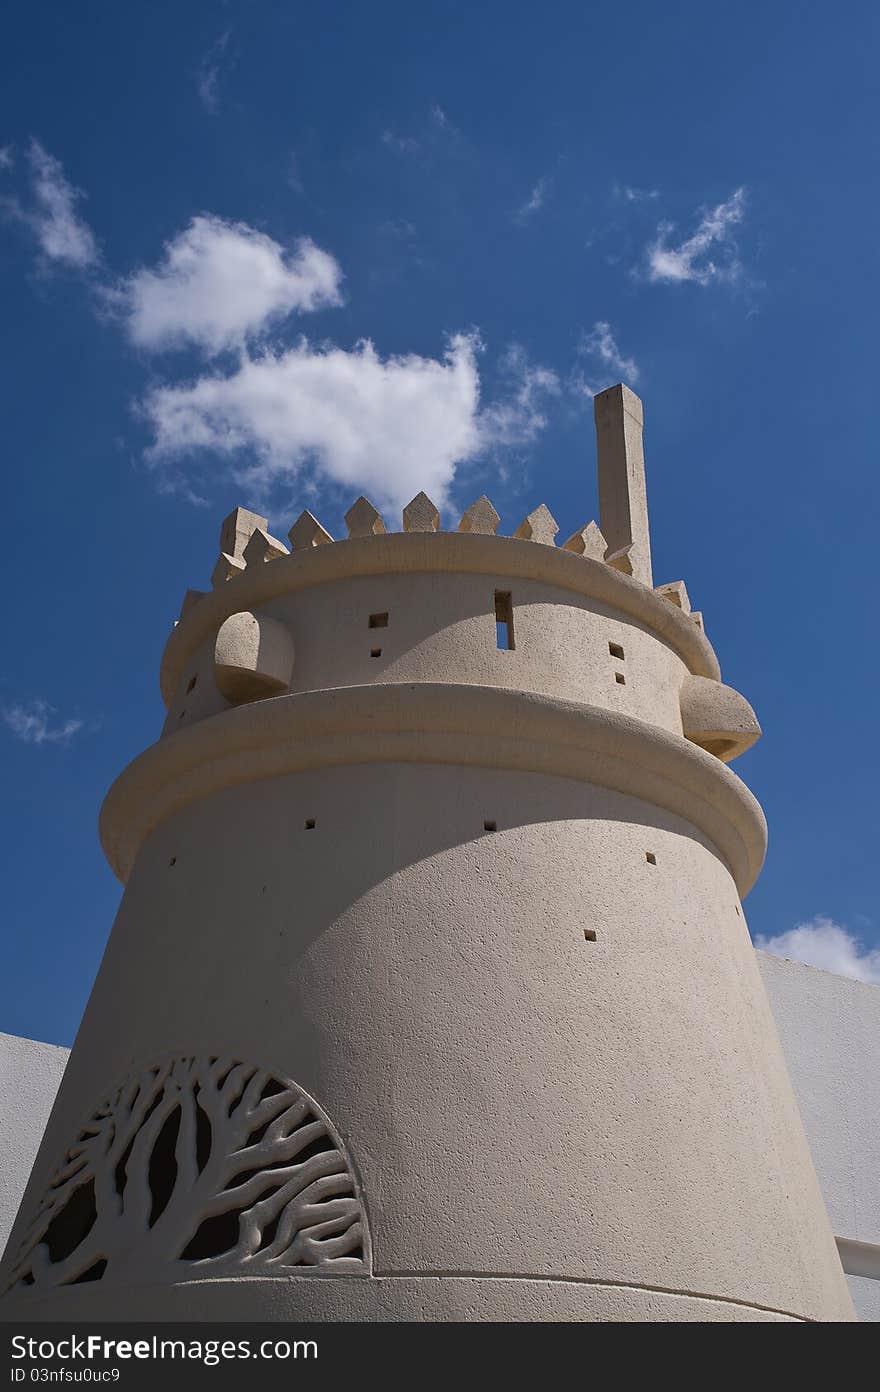 View of an Arabian Castle Turret under vivid bright blue cloudy sky in the UAE. View of an Arabian Castle Turret under vivid bright blue cloudy sky in the UAE